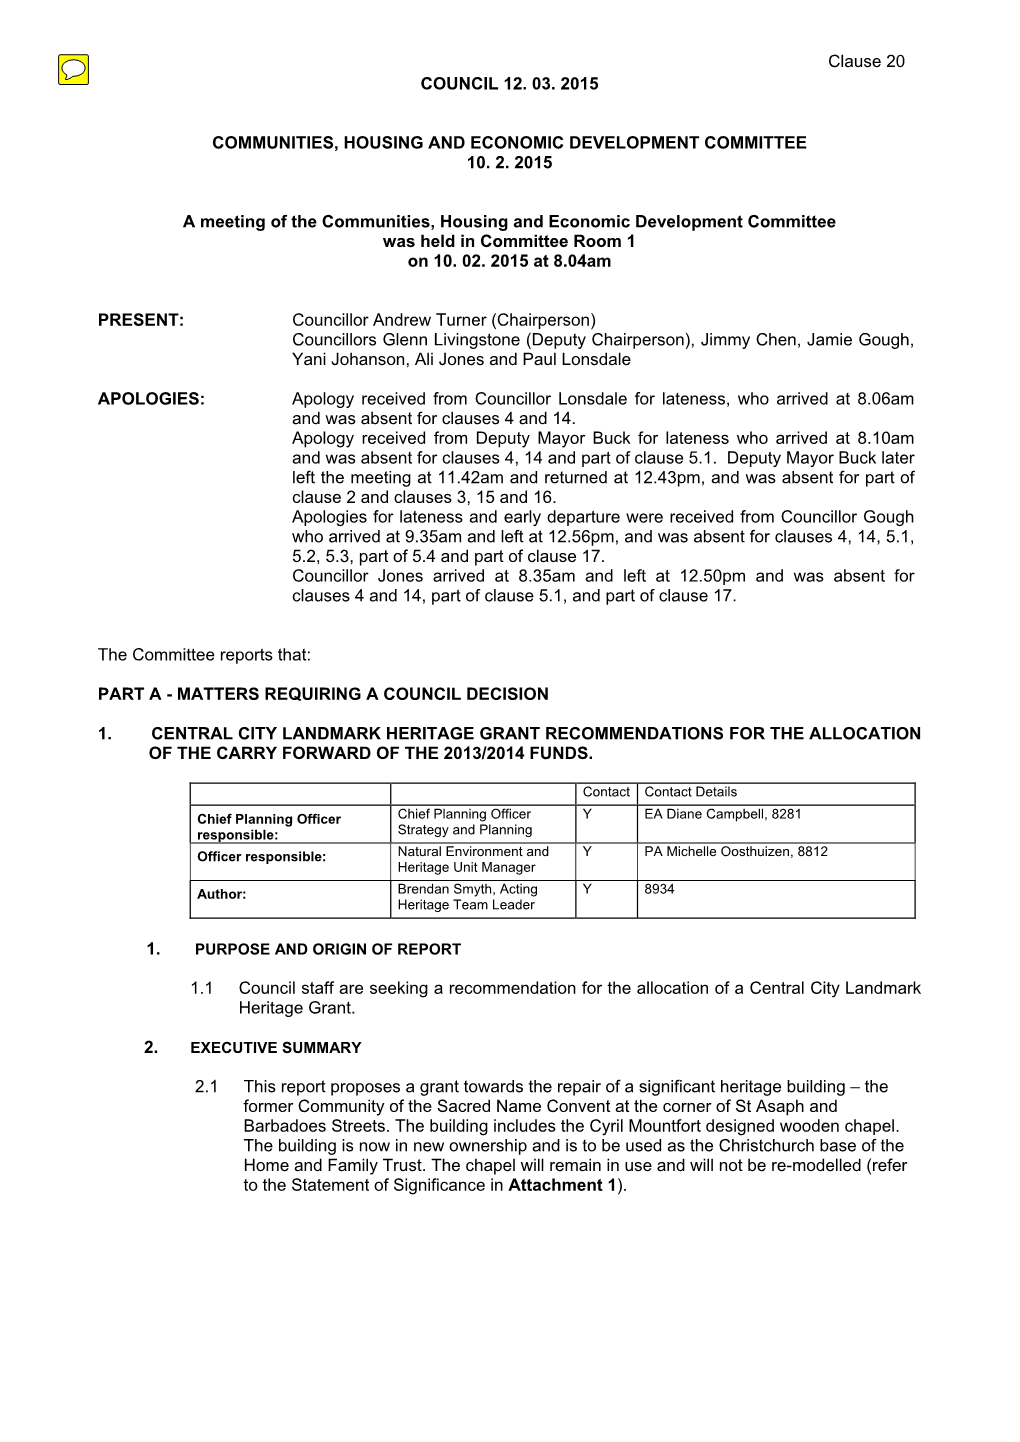 Council 12. 03. 2015 Communities, Housing And